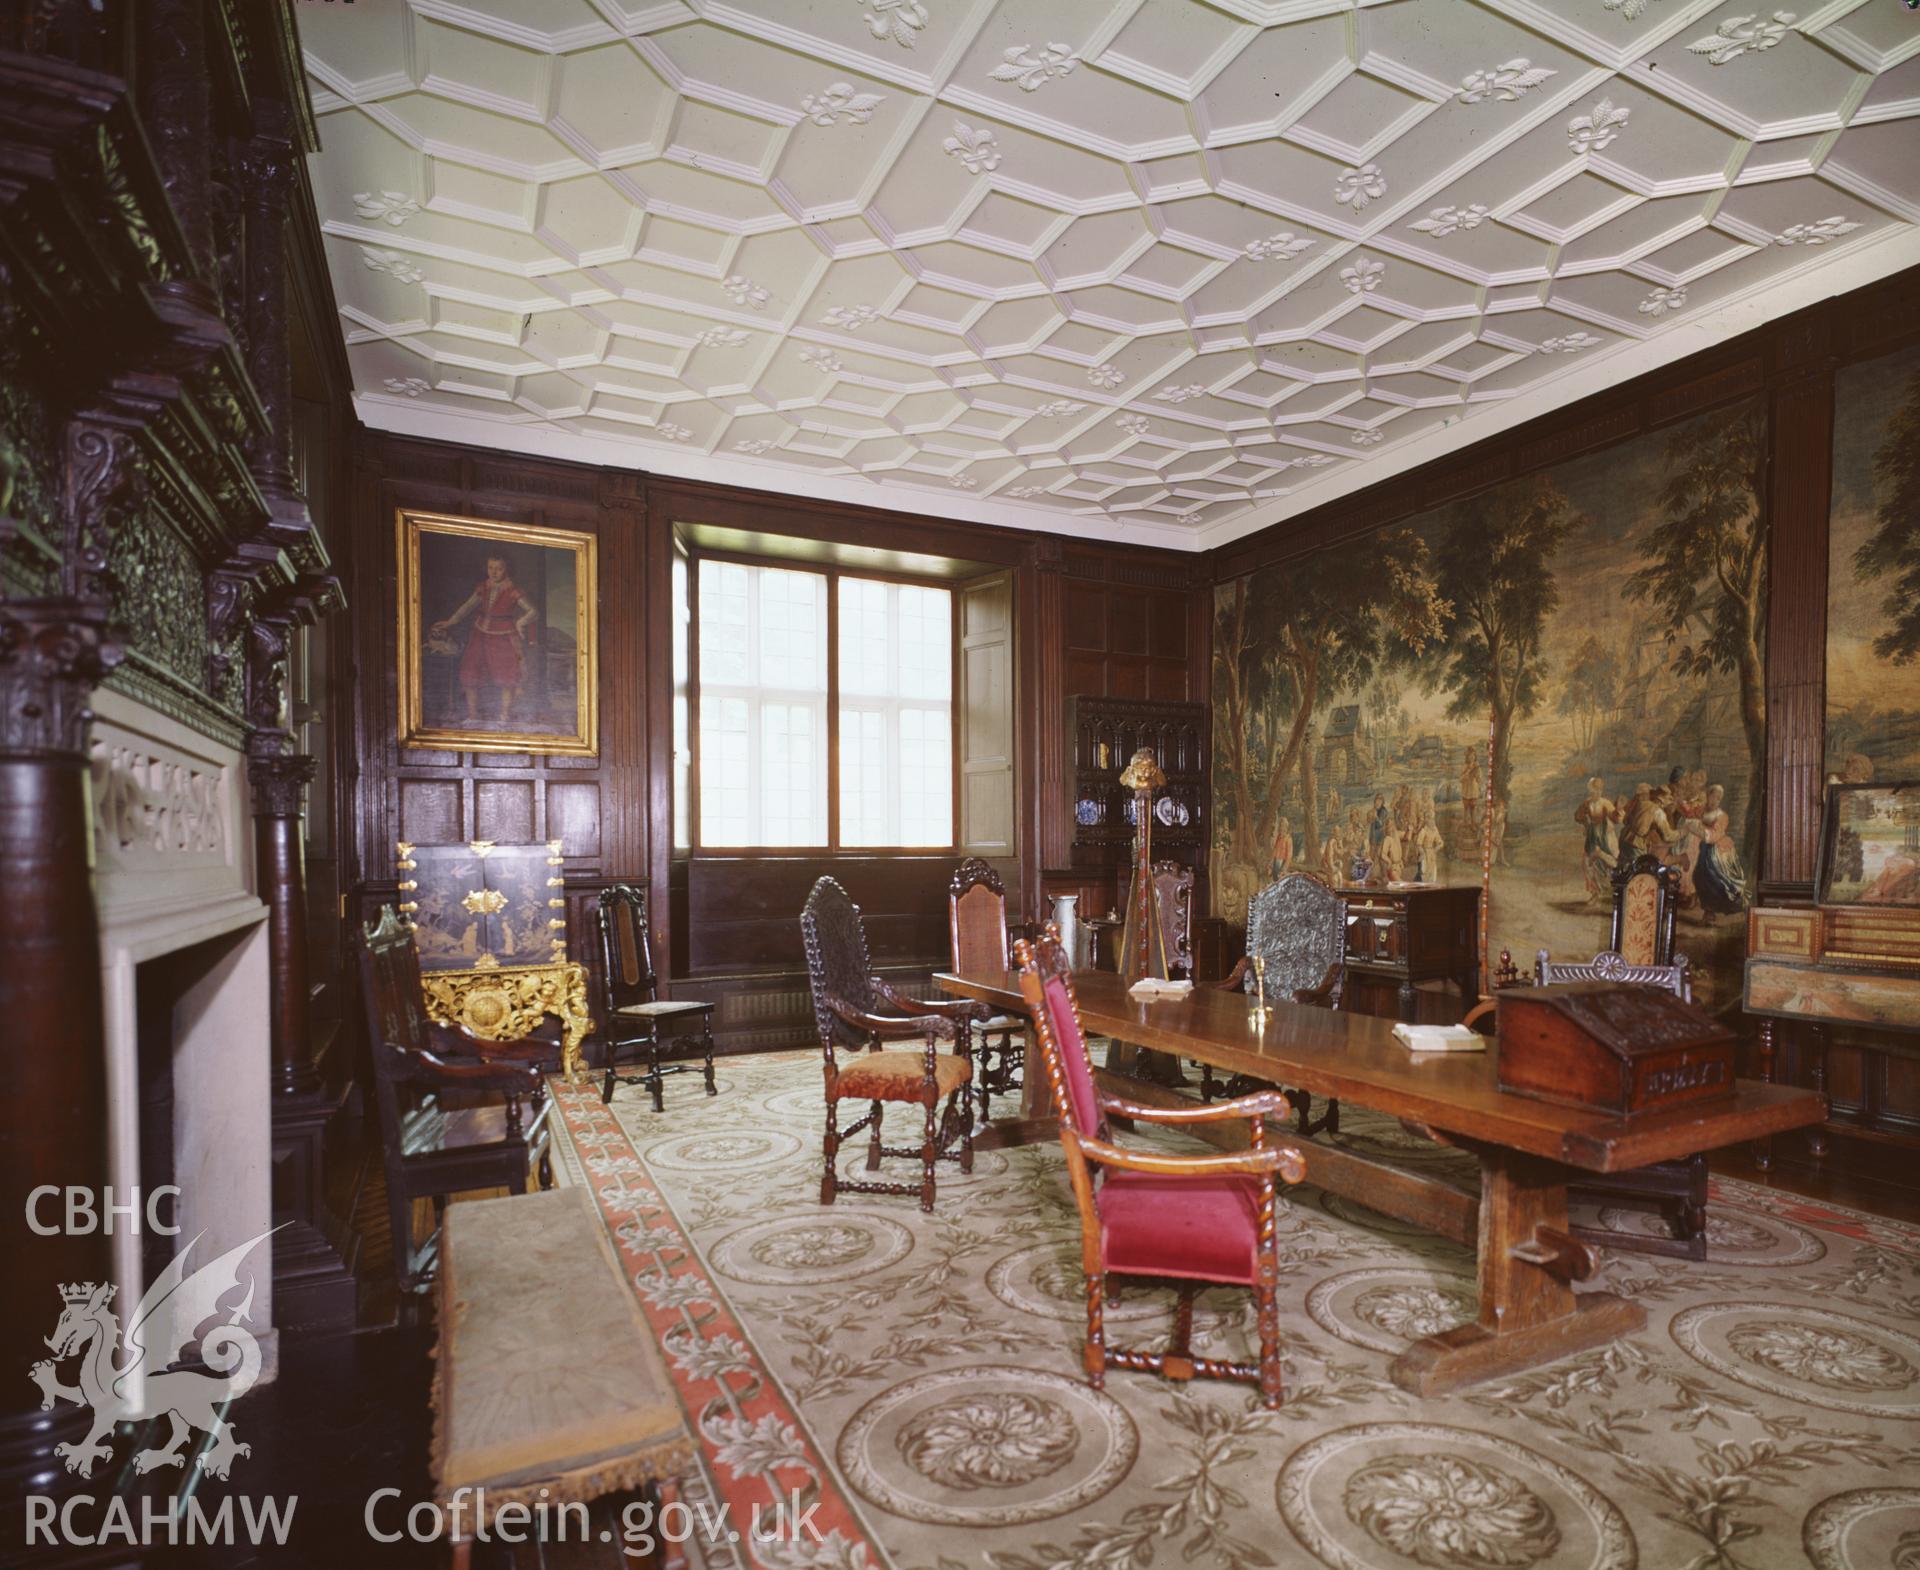 RCAHMW colour transparency showing  view of the drawing room at St Fagans Castle.